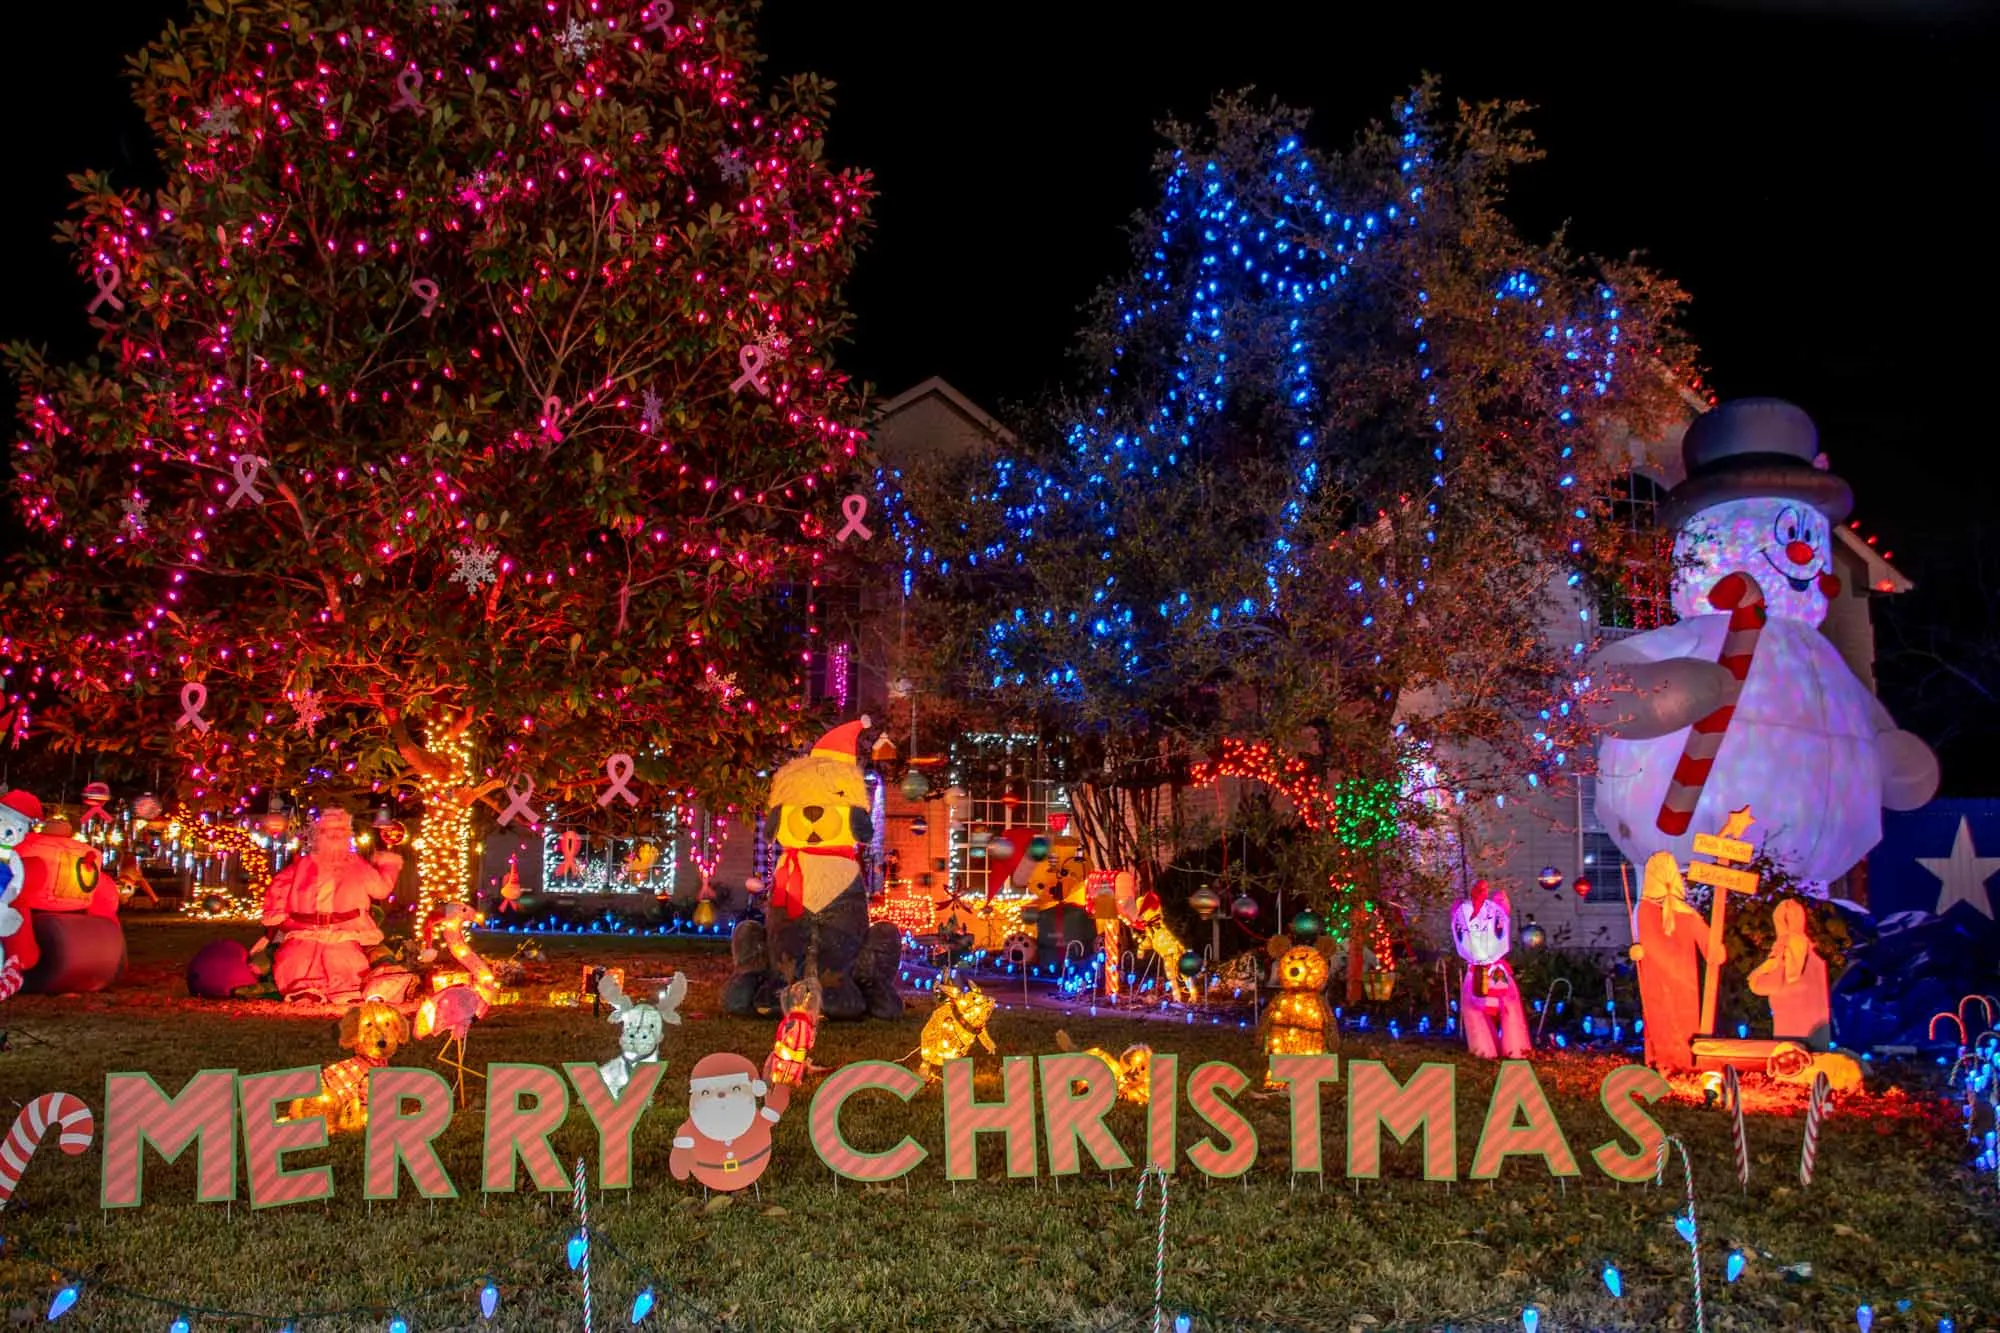 Christmas light display including an inflatable snowman and other characters plus a Merry Christmas sign 